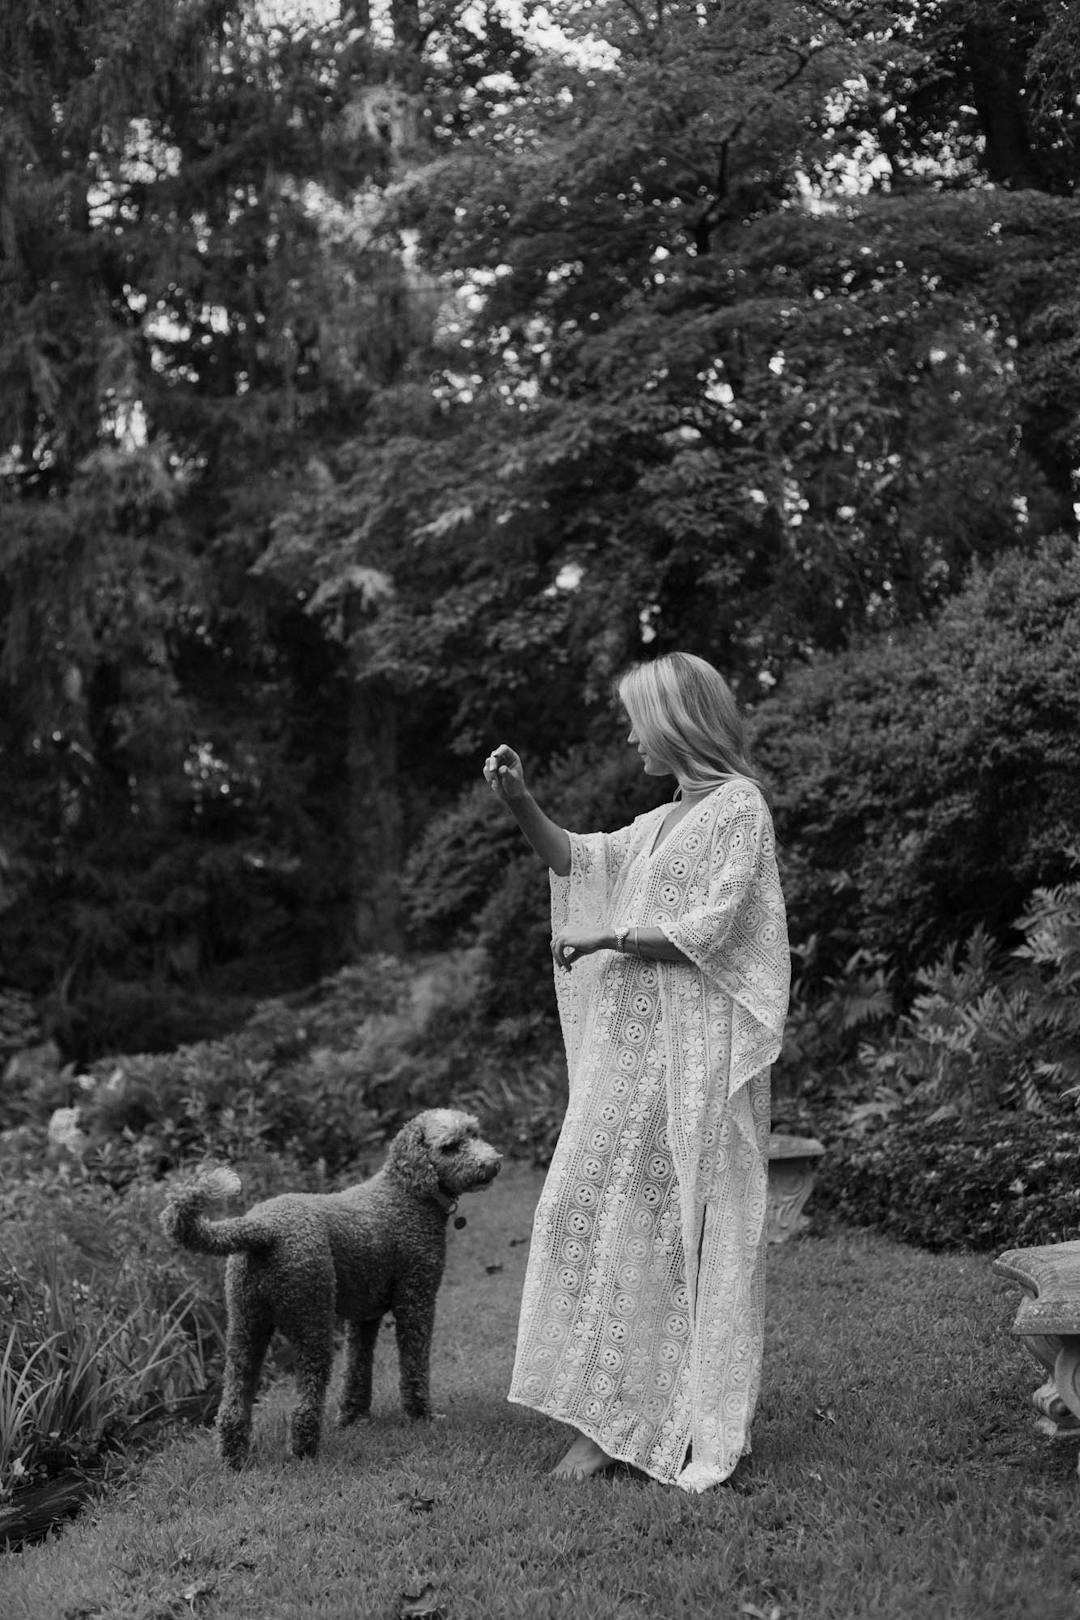 black and white medium format maternity portrait of woman in white dress playing with golden doodle